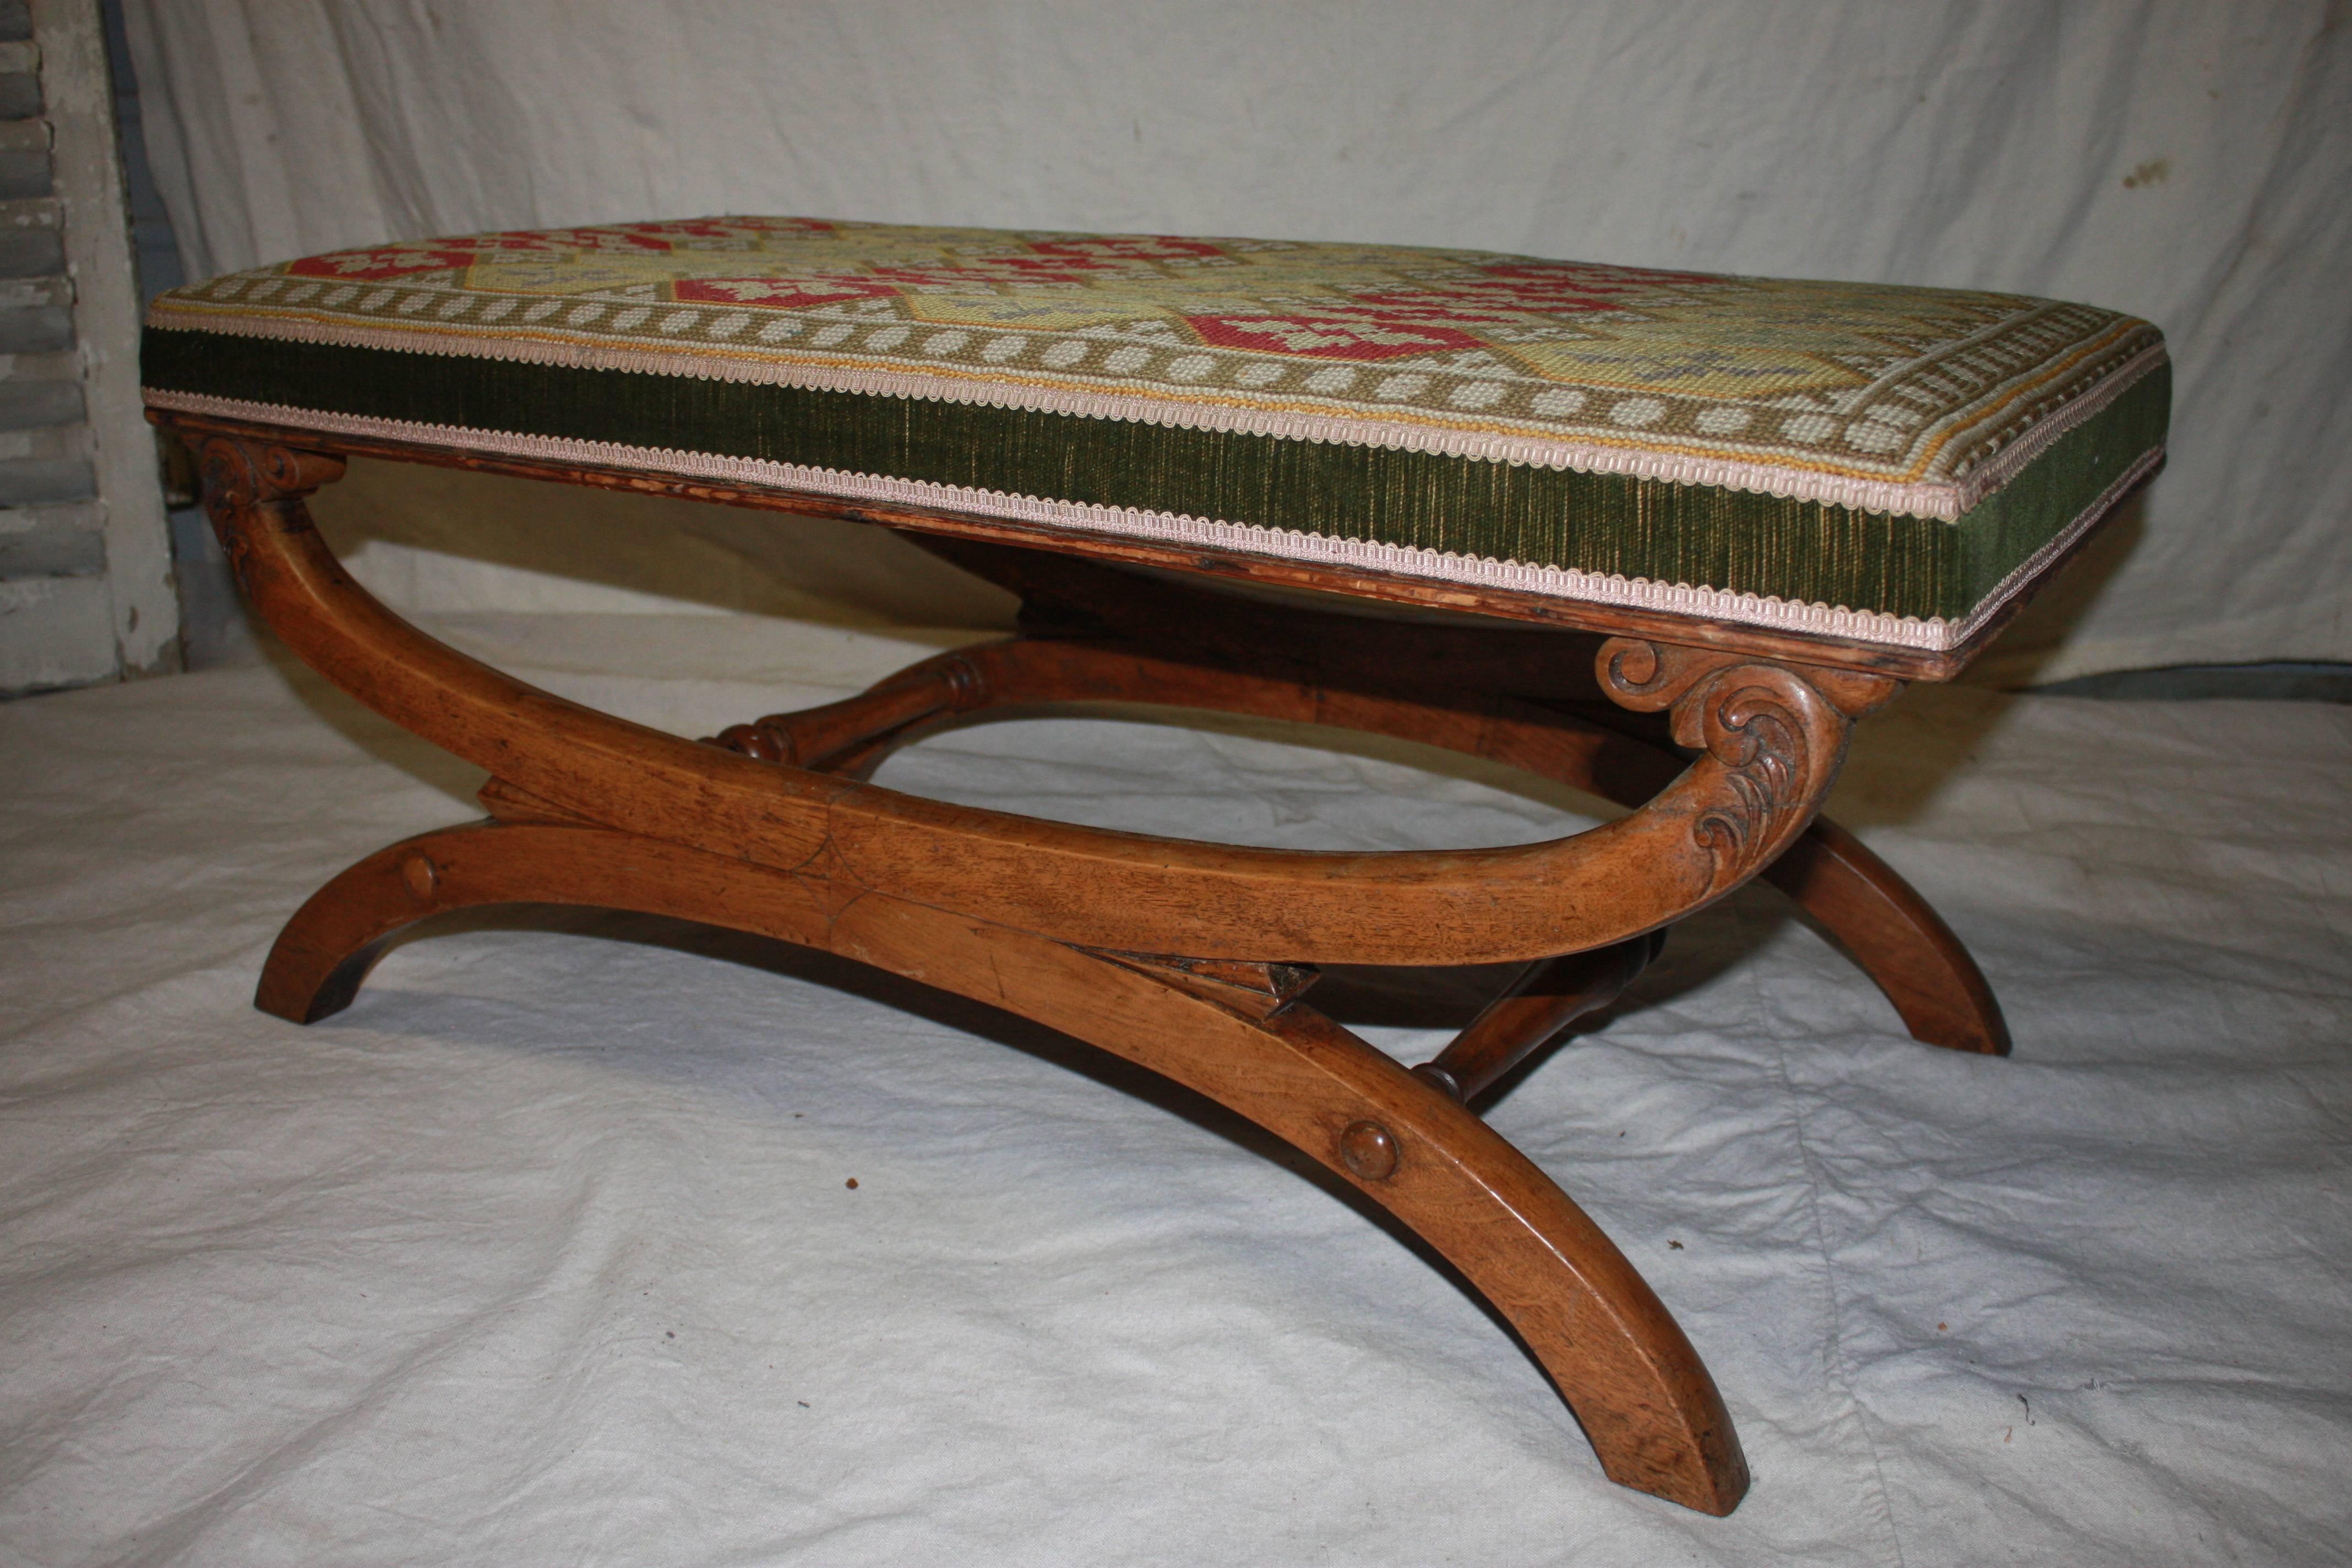 Mid-19th century French stool, the wood is in walnut. The seat is covered of an old needle point tapestry.